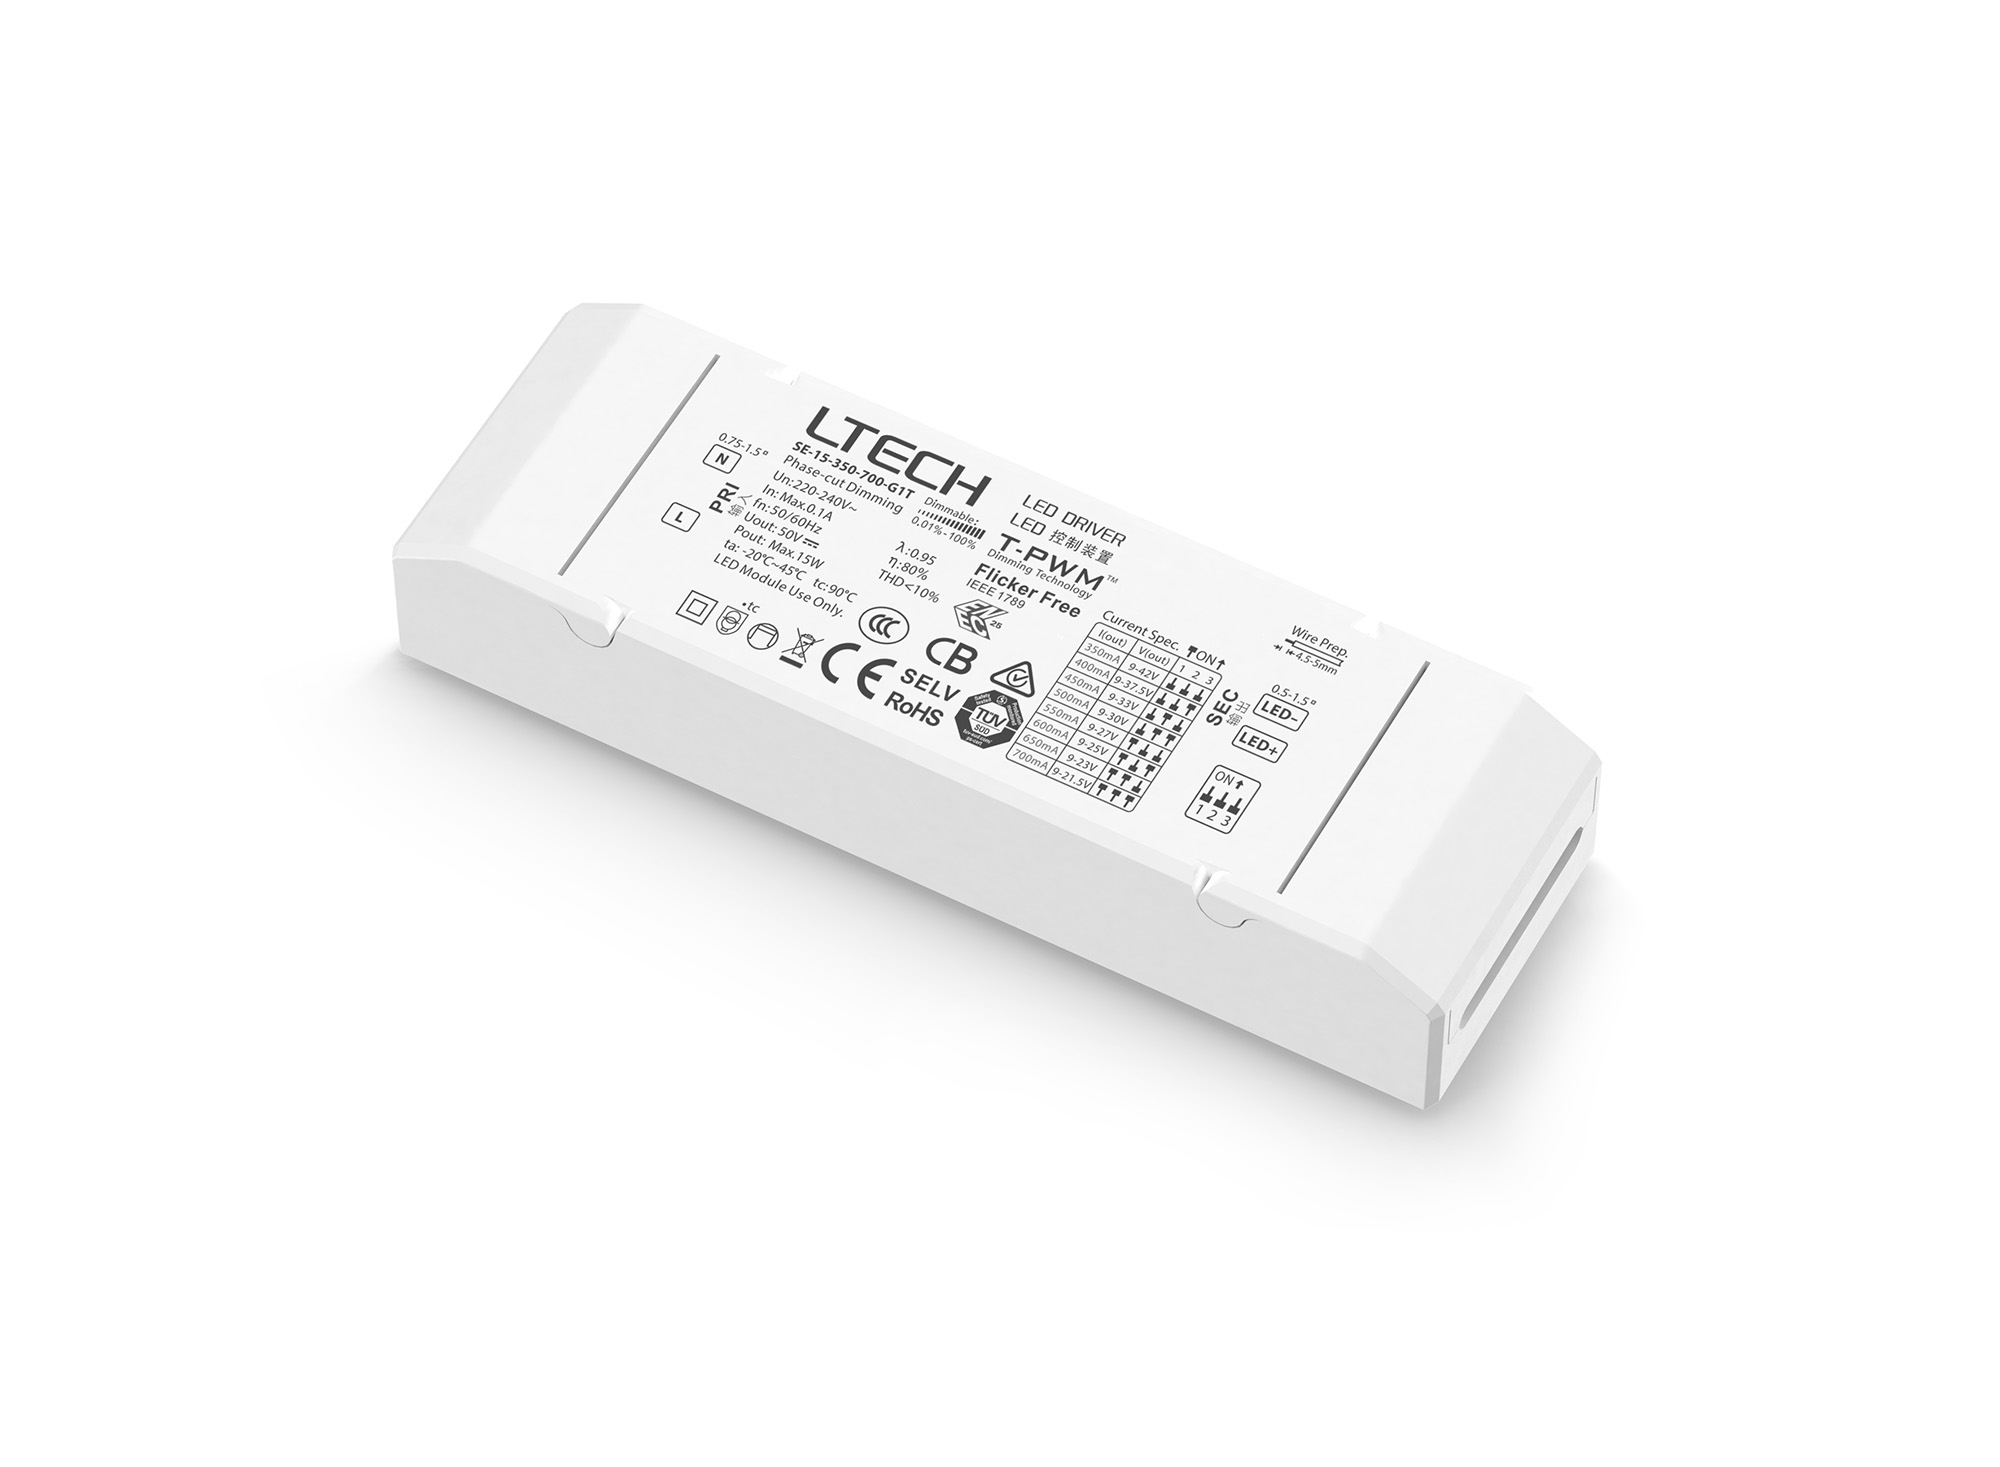 SE-15-350-700-G1T  Triac/ELV Push Dim PWM 15W Constant Current Dimmable Driver 45V 150-700mA; IP44.